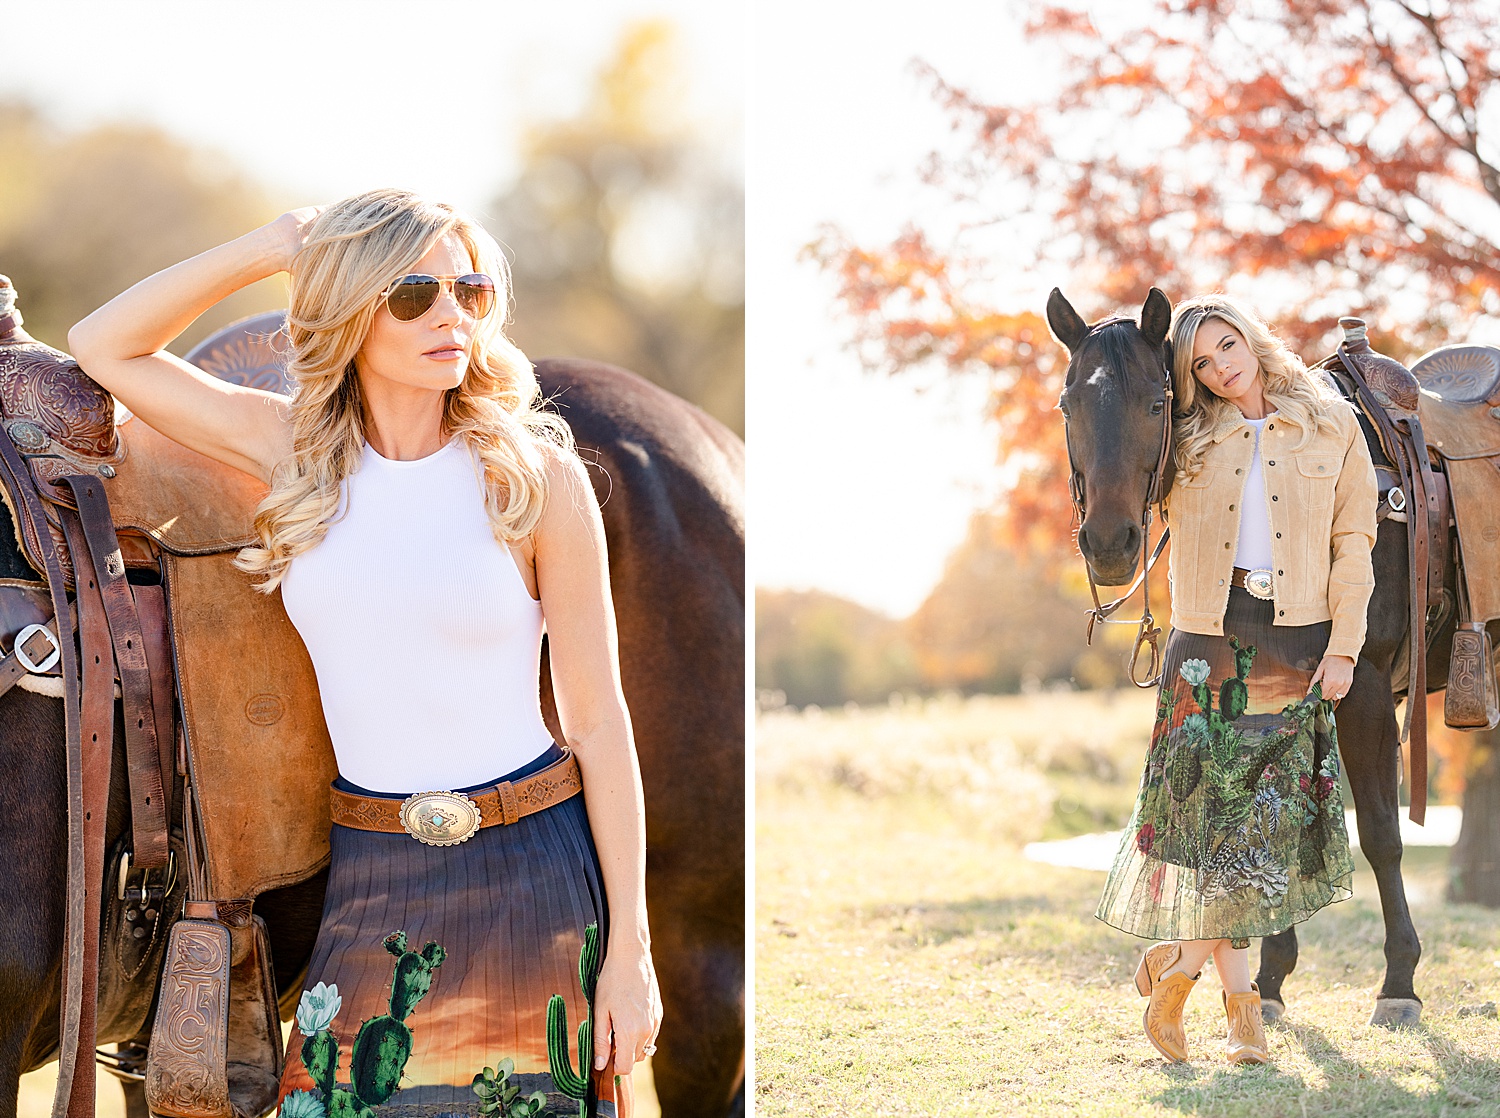 NFR OUTFIT SERIES: 5 outfit ideas for night time! Which is your